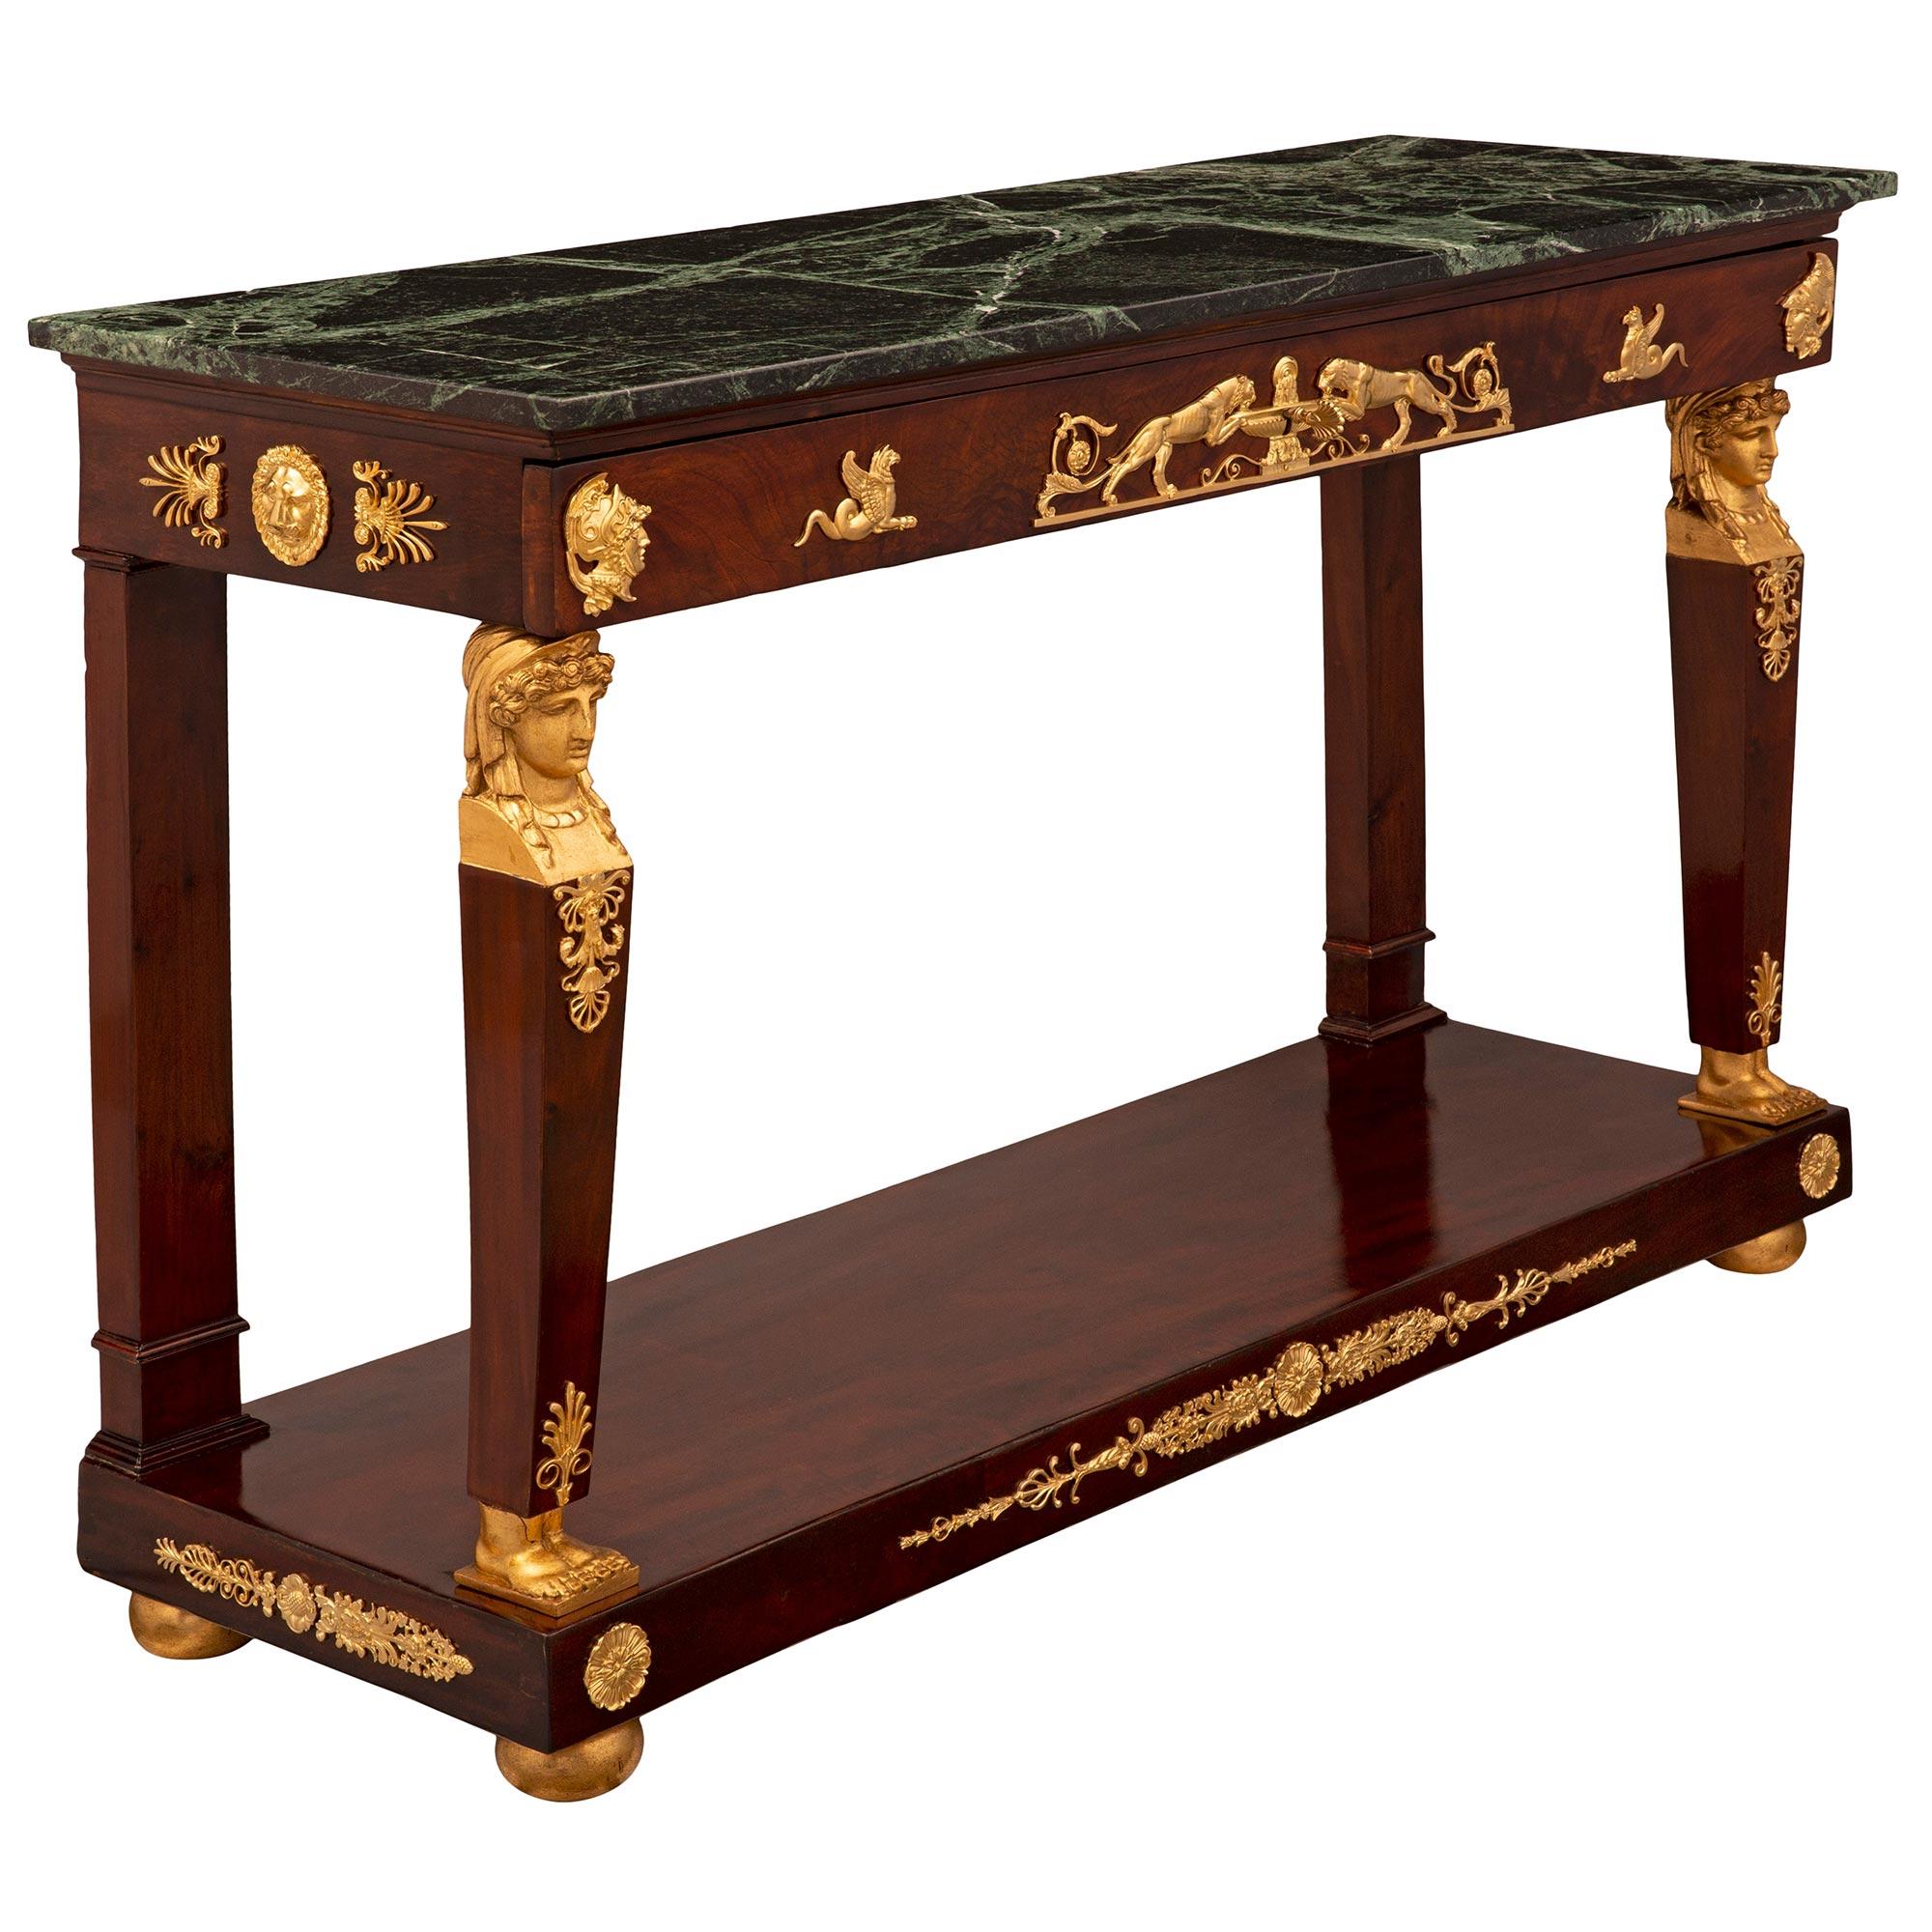 French 19th Century 1st Empire Period Mahogany, Ormolu, and Marble Console In Good Condition For Sale In West Palm Beach, FL